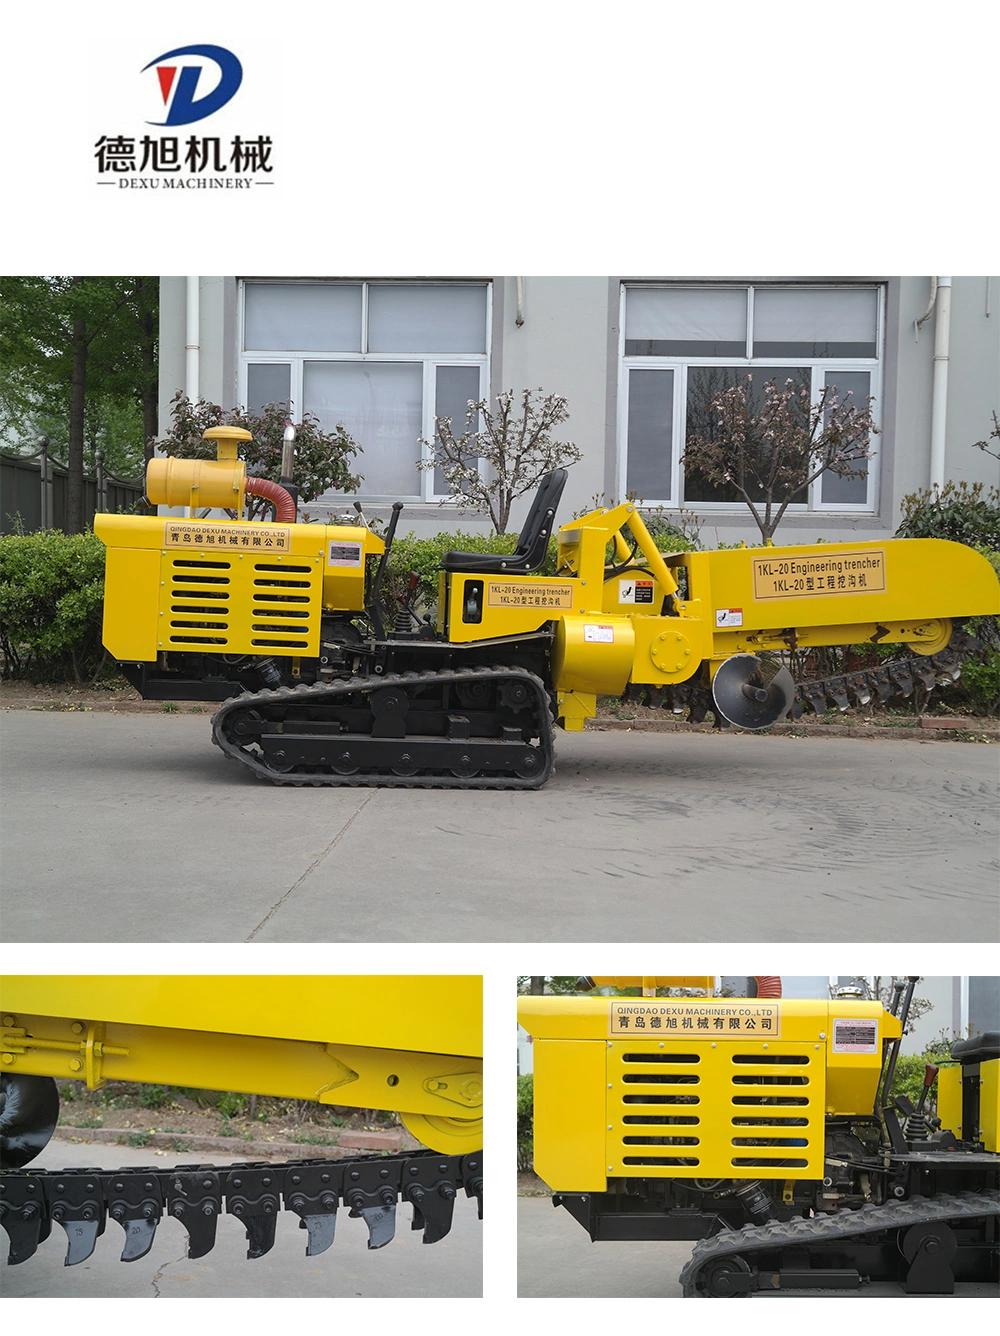 Power Tiller/ Gasoline Cultivtor and Ditcher or Trencher